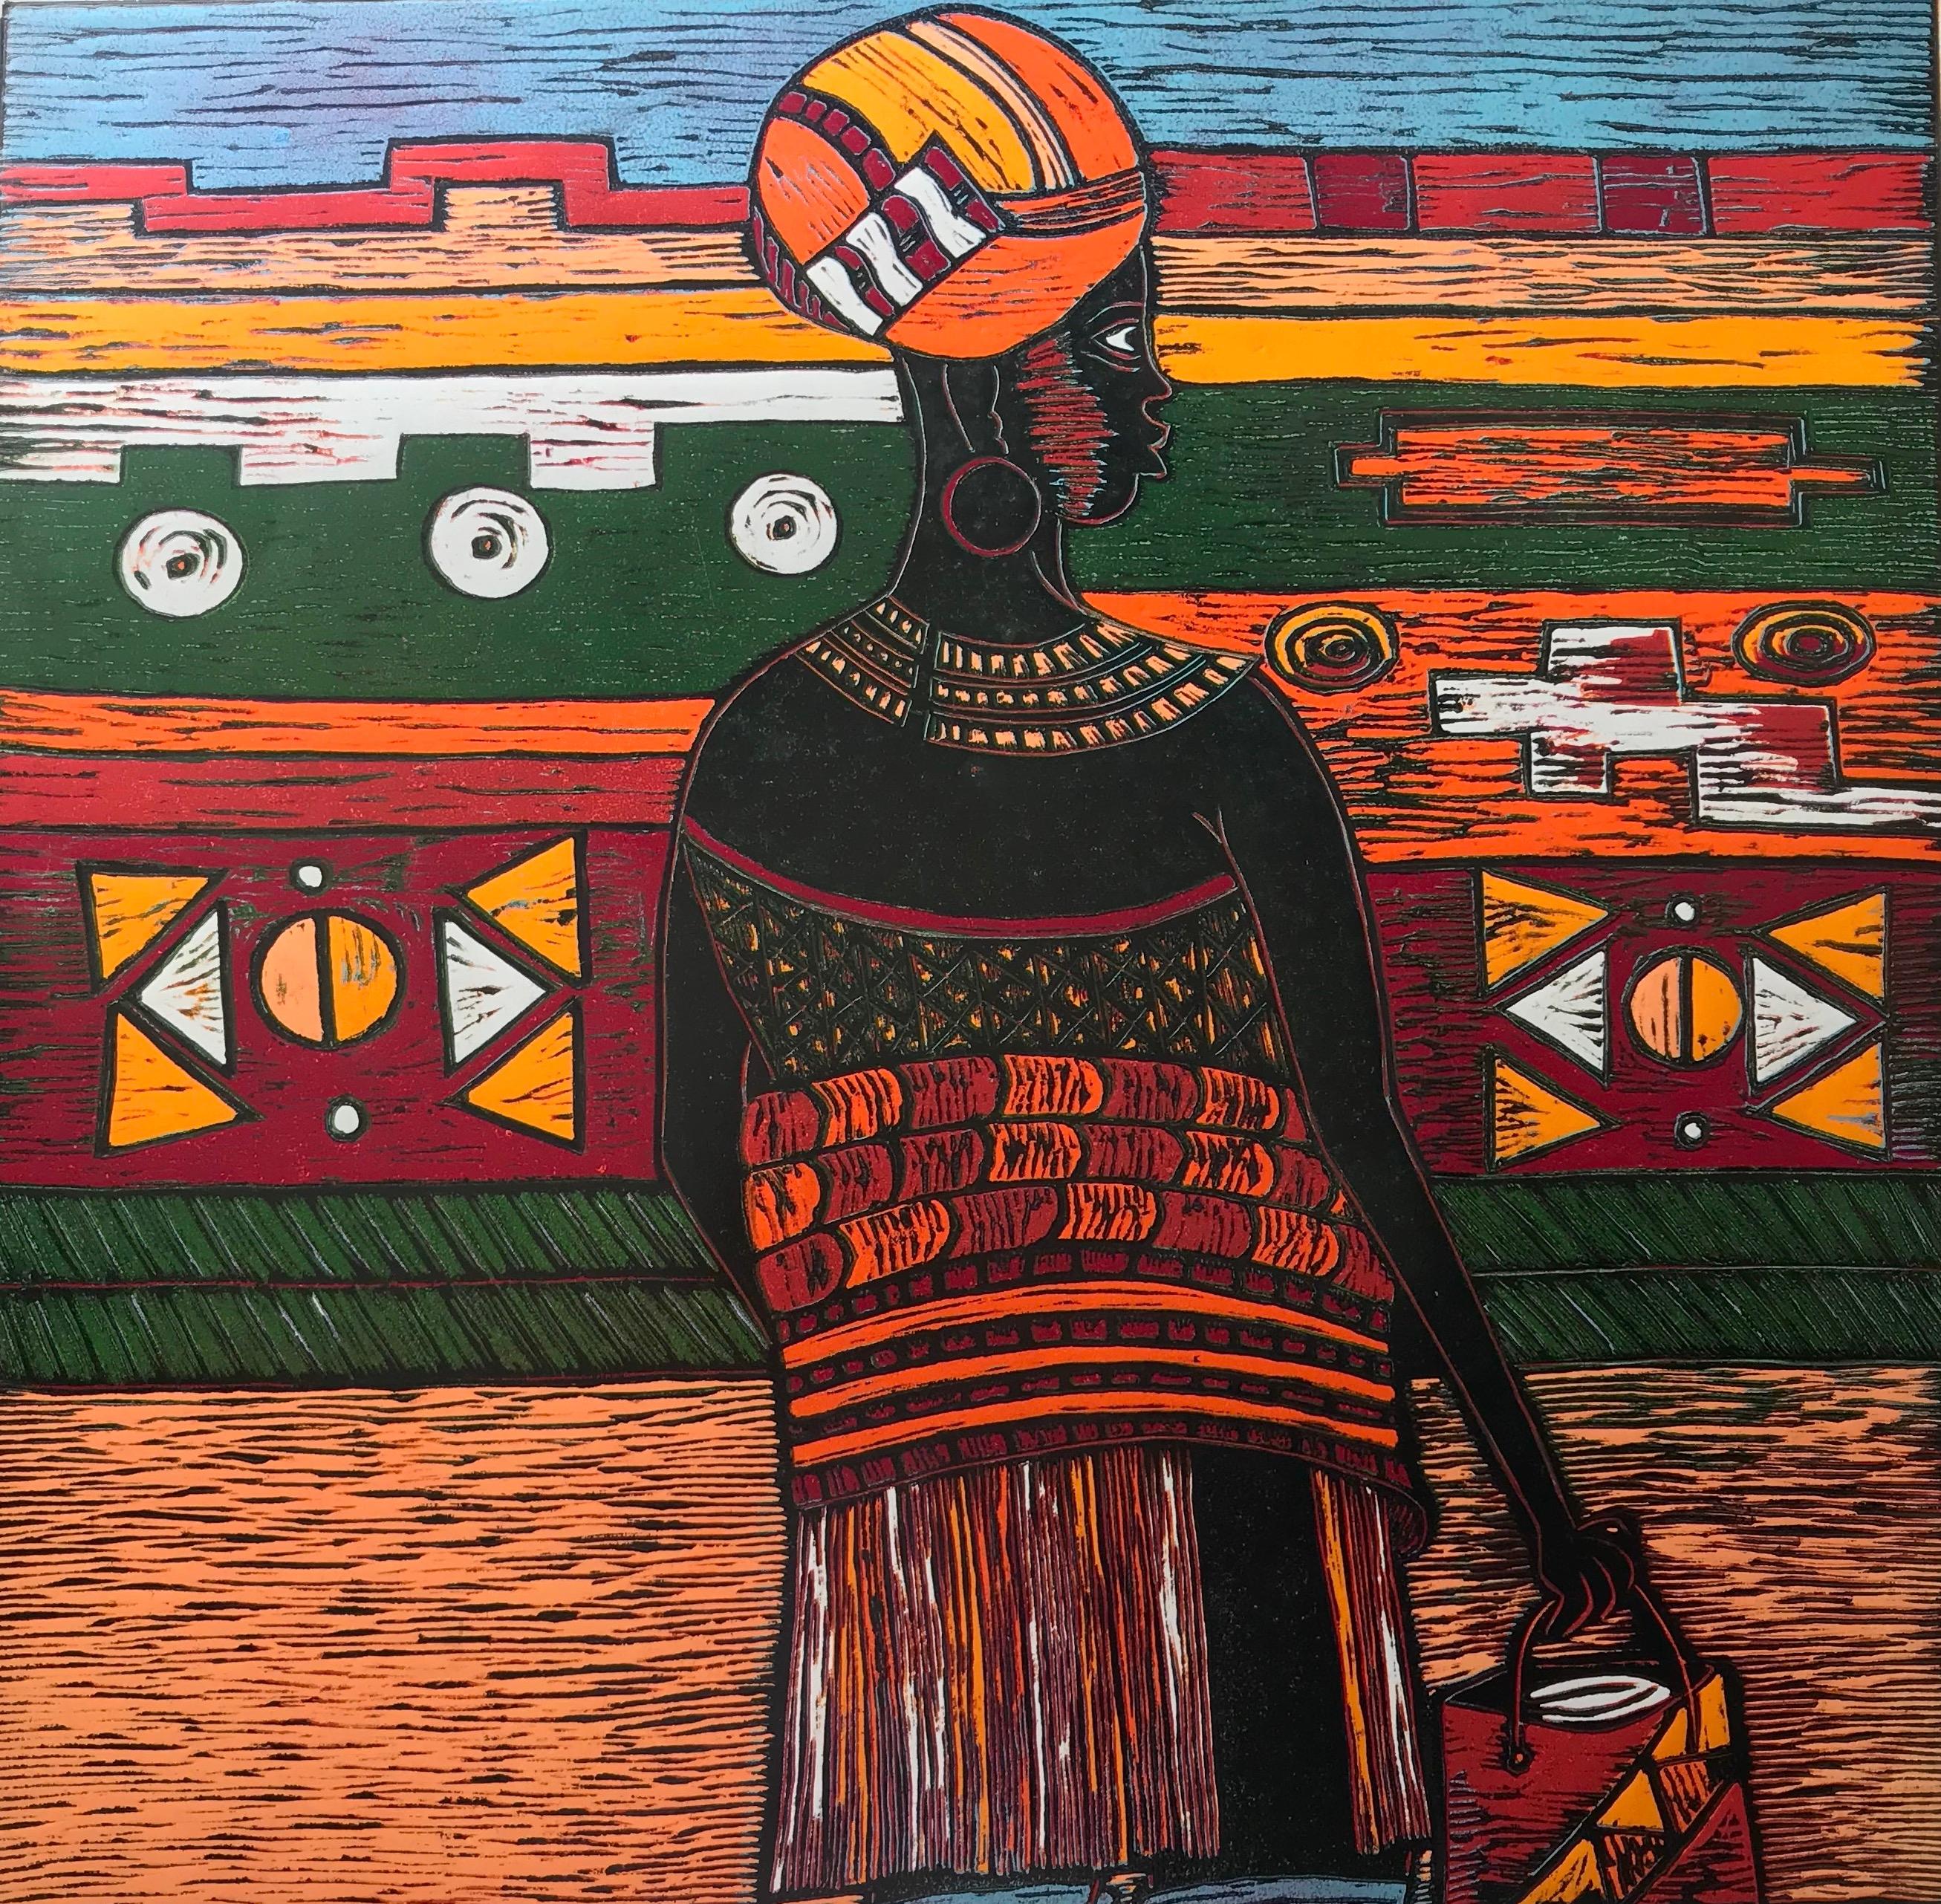 Isaac Sithole Figurative Print - 21 st century South African Wood Cut Print on paper - African Dream